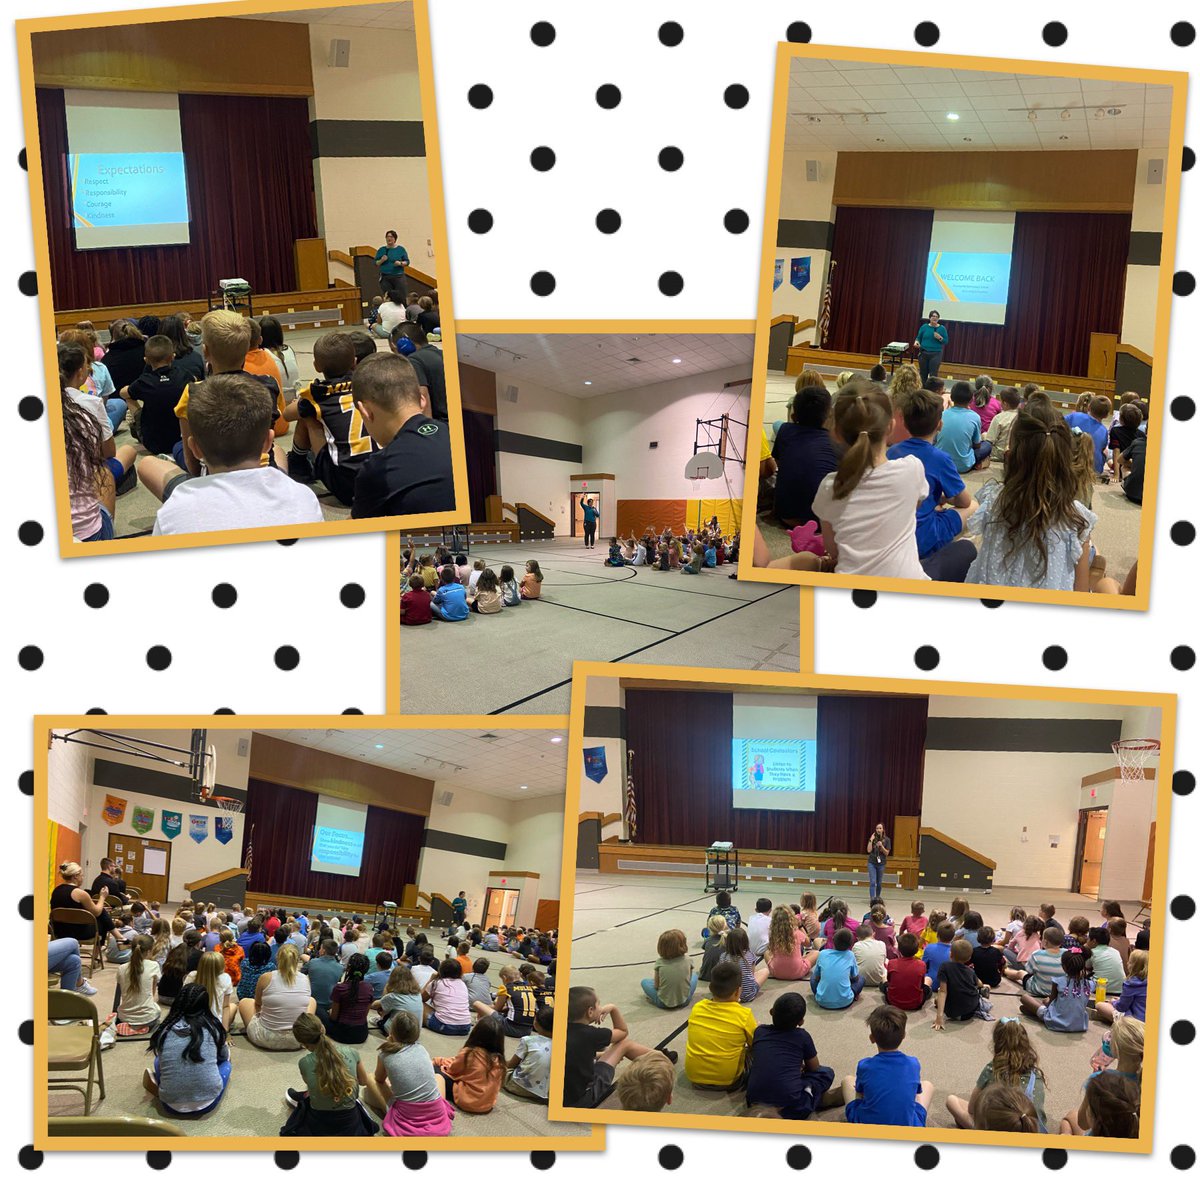 QE students in grades 1-5 gathered today for a “welcome back” assembly. Our focus for this school year is to show KINDNESS in all that we do! We are looking forward to a great year! #QvillePride #inspiring #empowering #connecting